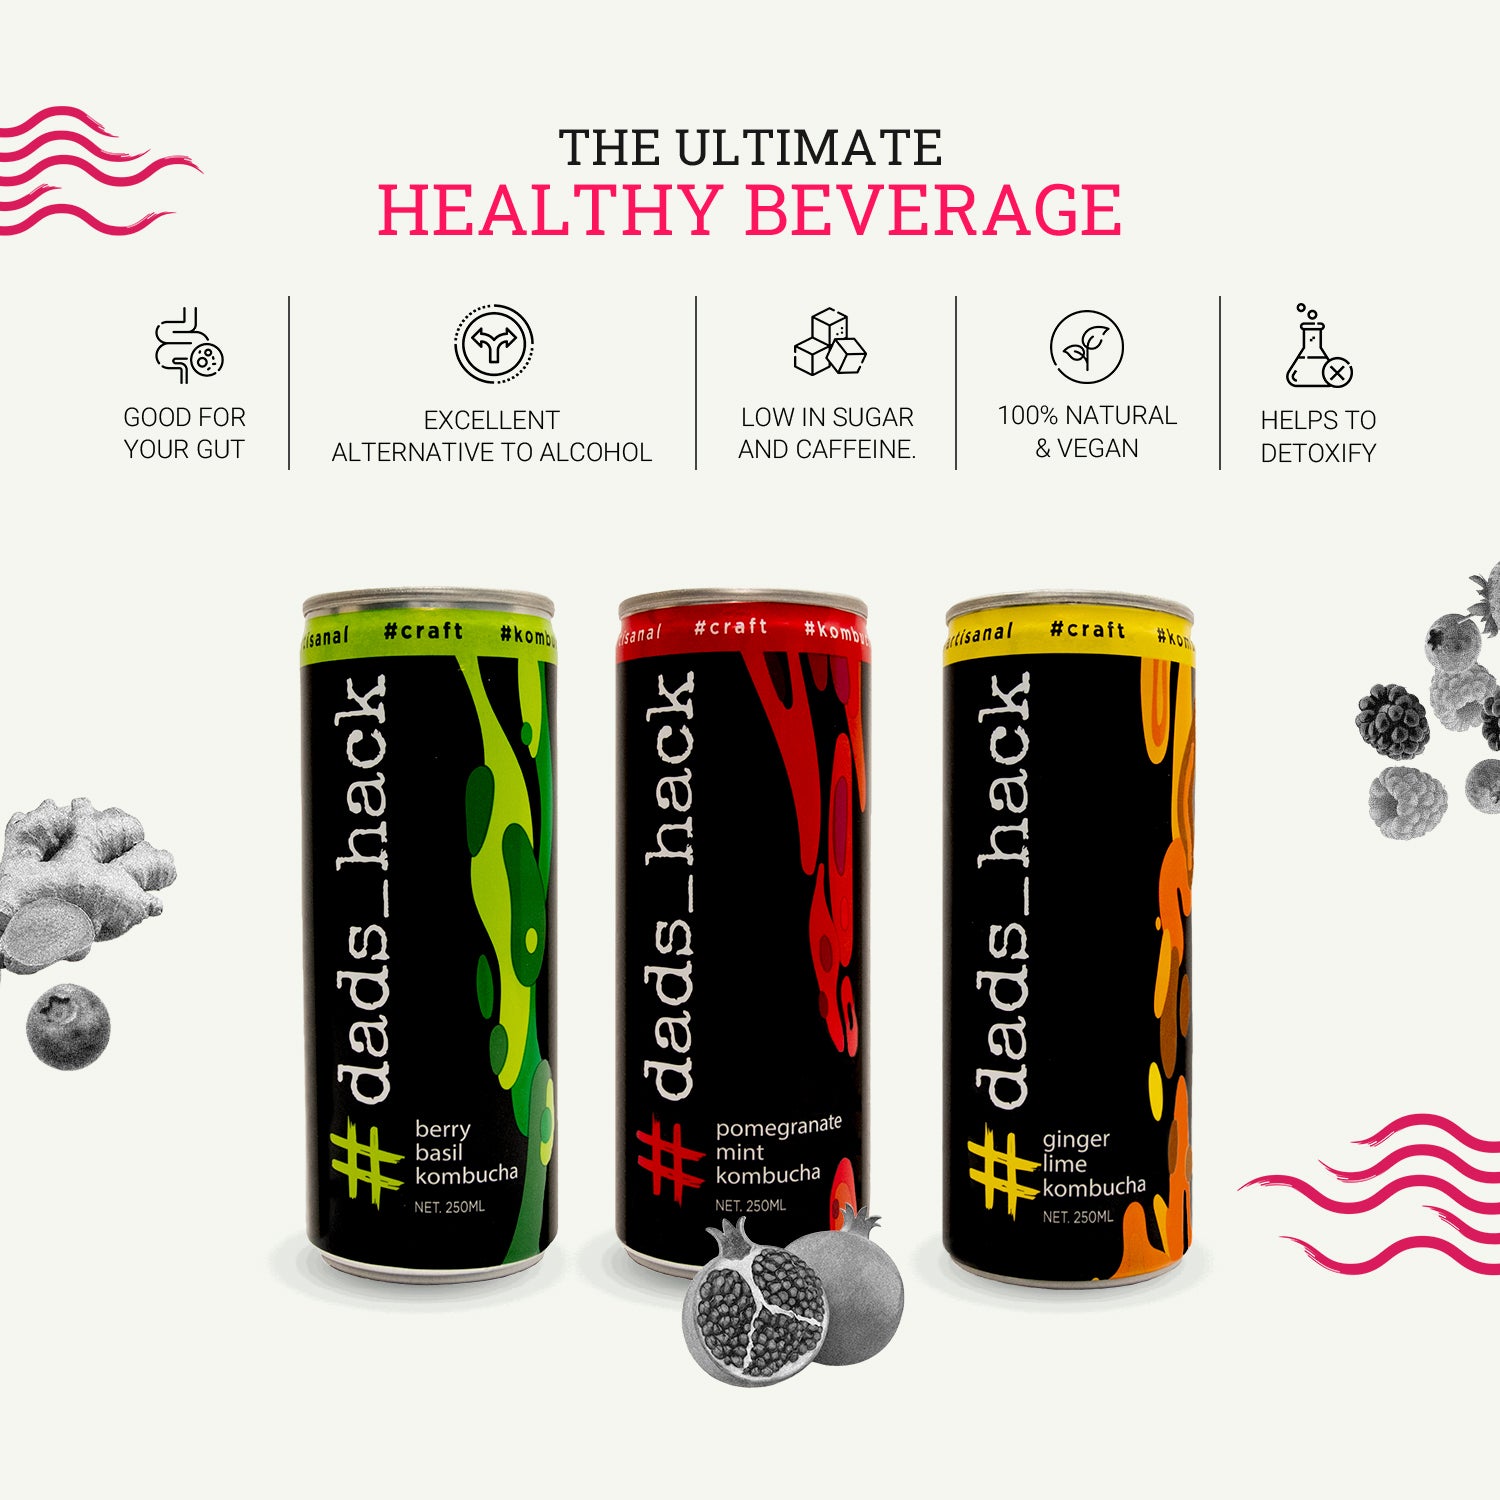 TrialPack of 3 cans - Mix Flavors